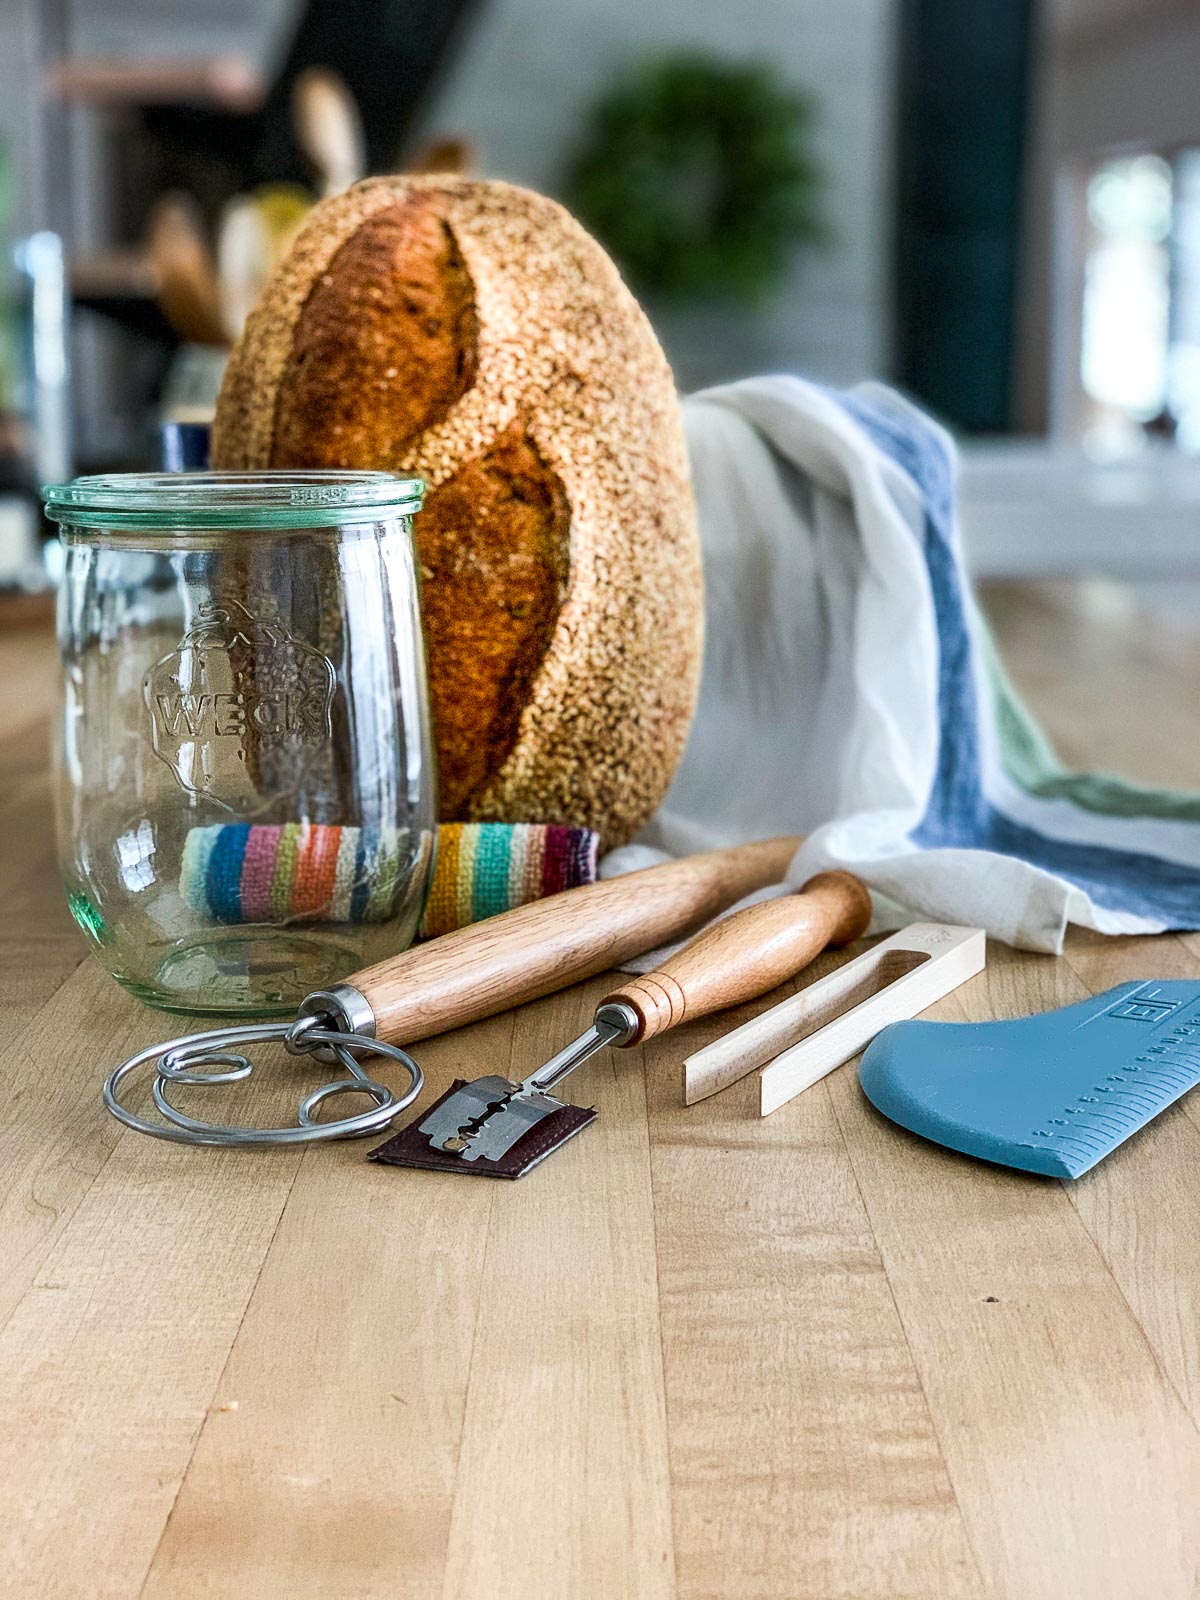 The 14 Breadmaking Tools You Need to Make Better Homemade Loaves